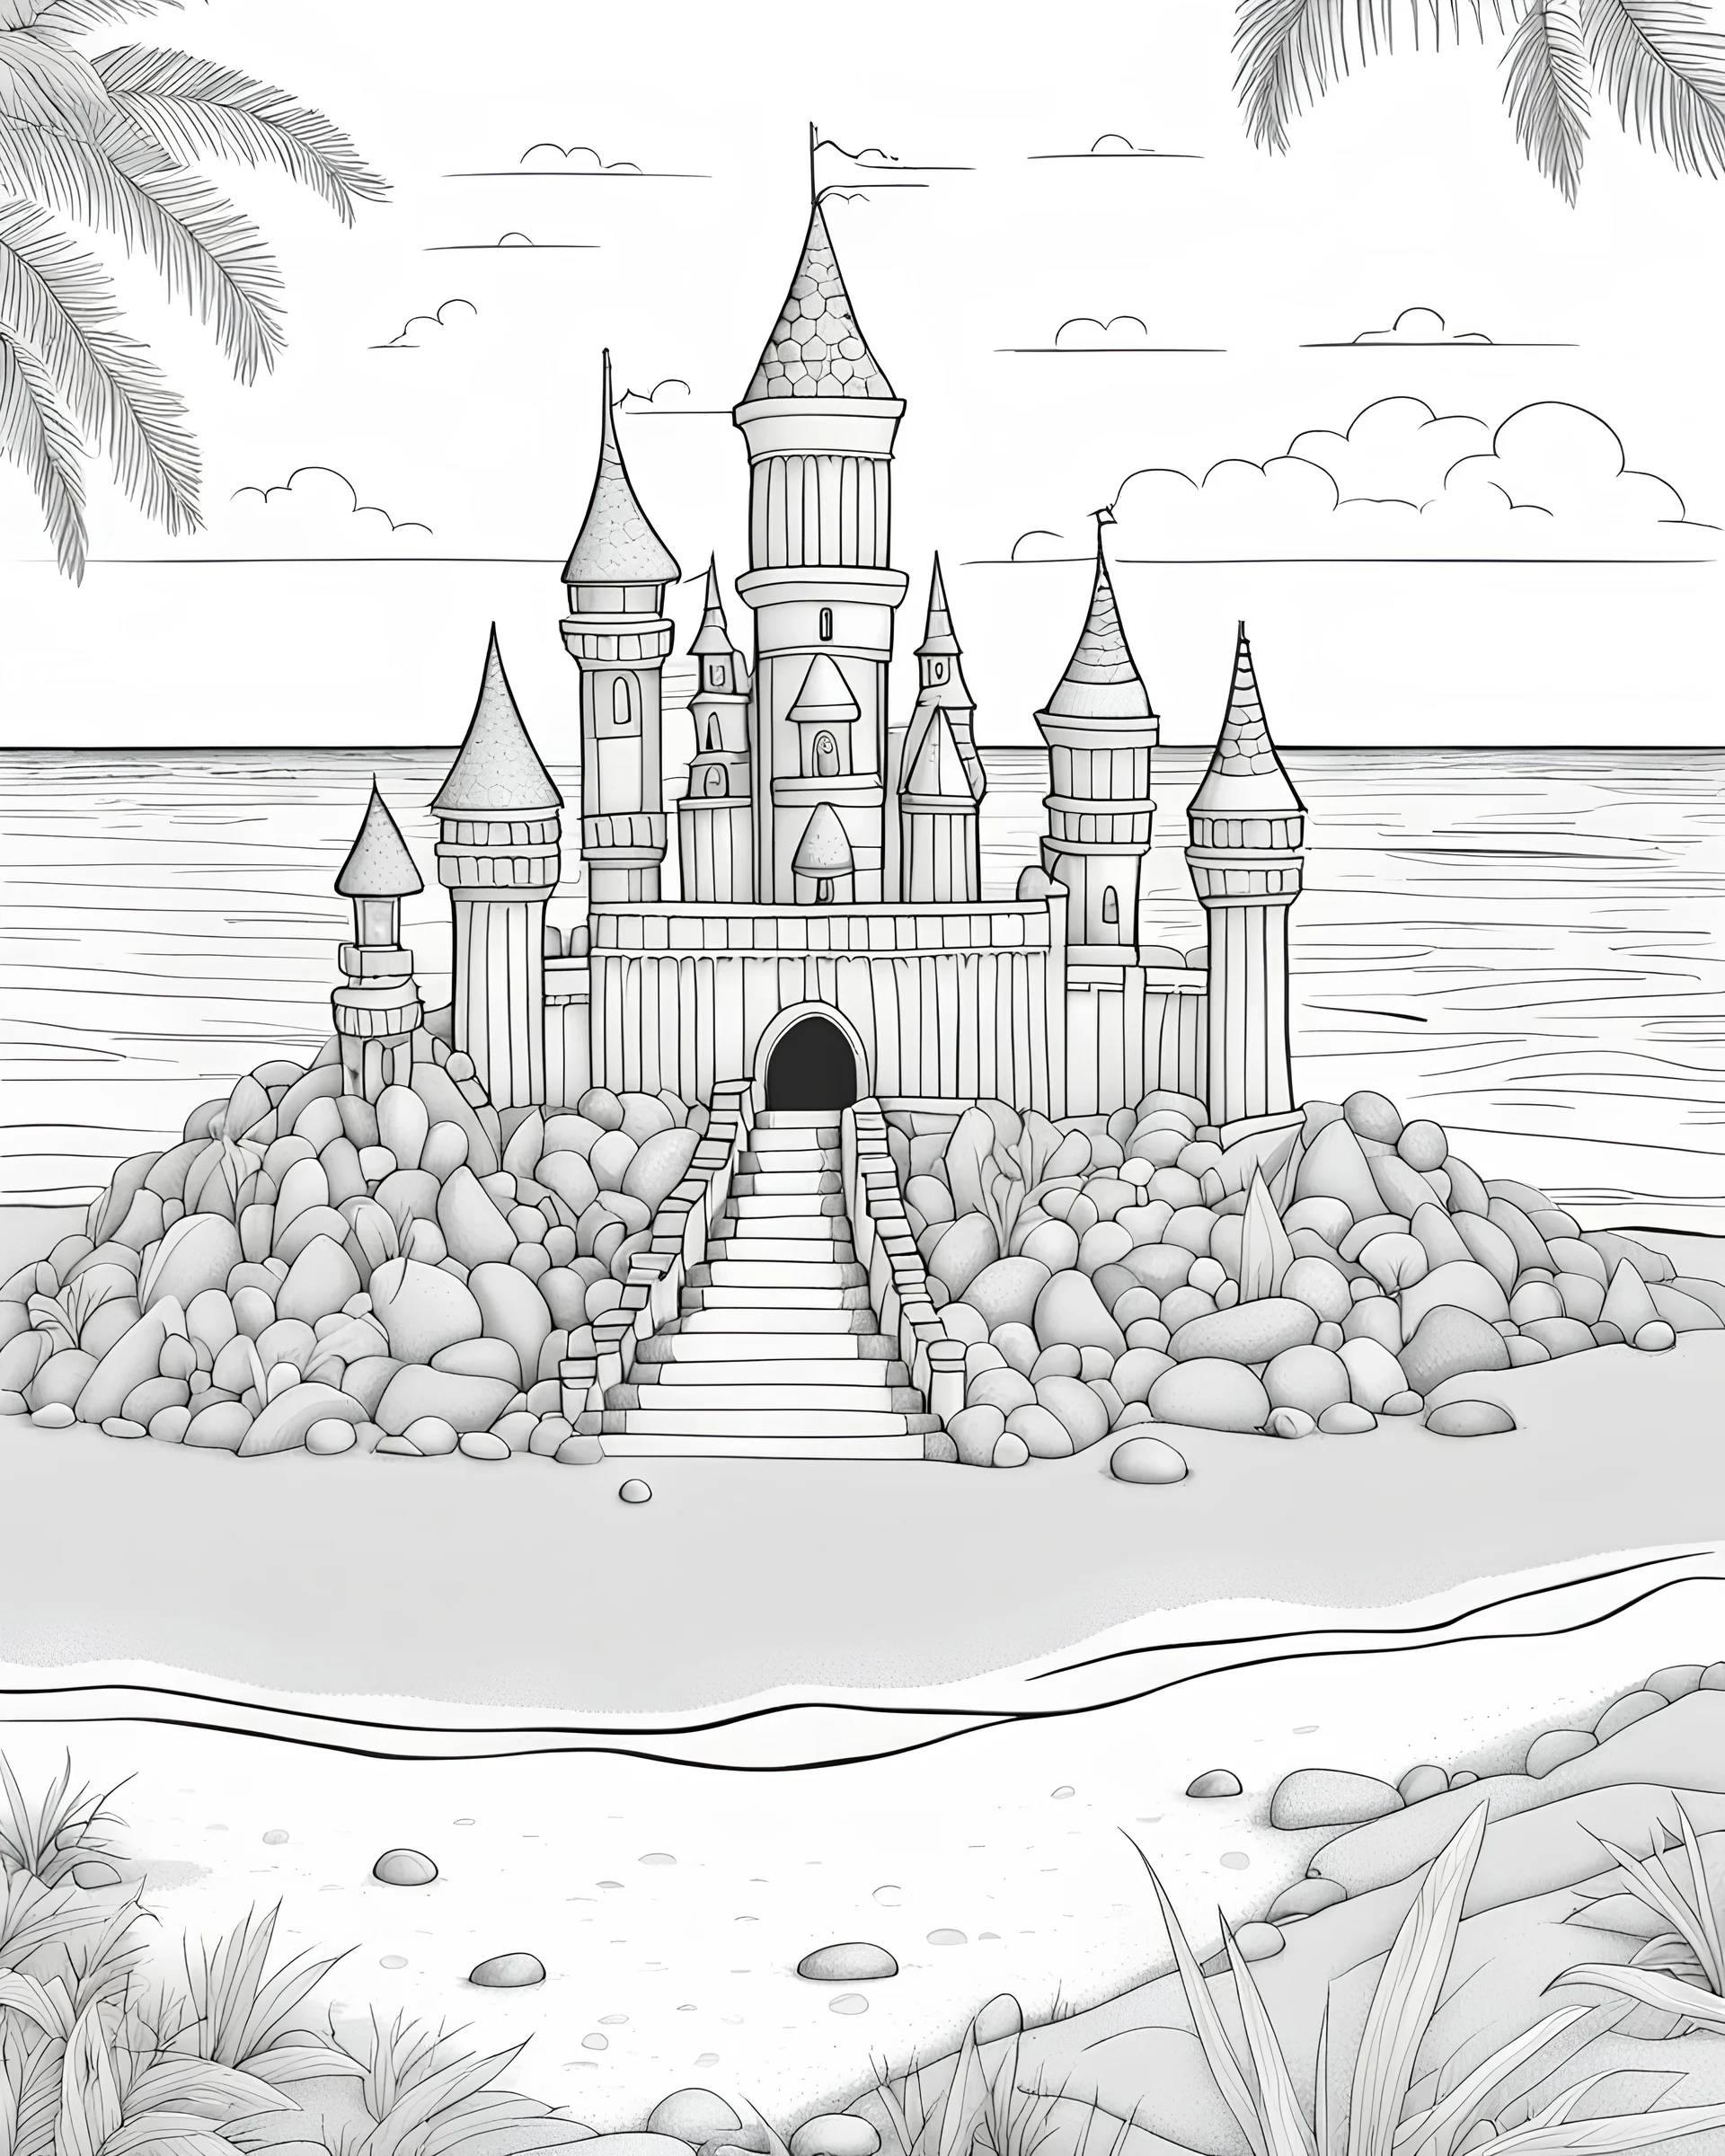 coloring page for adults, a sandcastle made of sand and pebbles on the beach, high details, very intricate, black and white, no color.